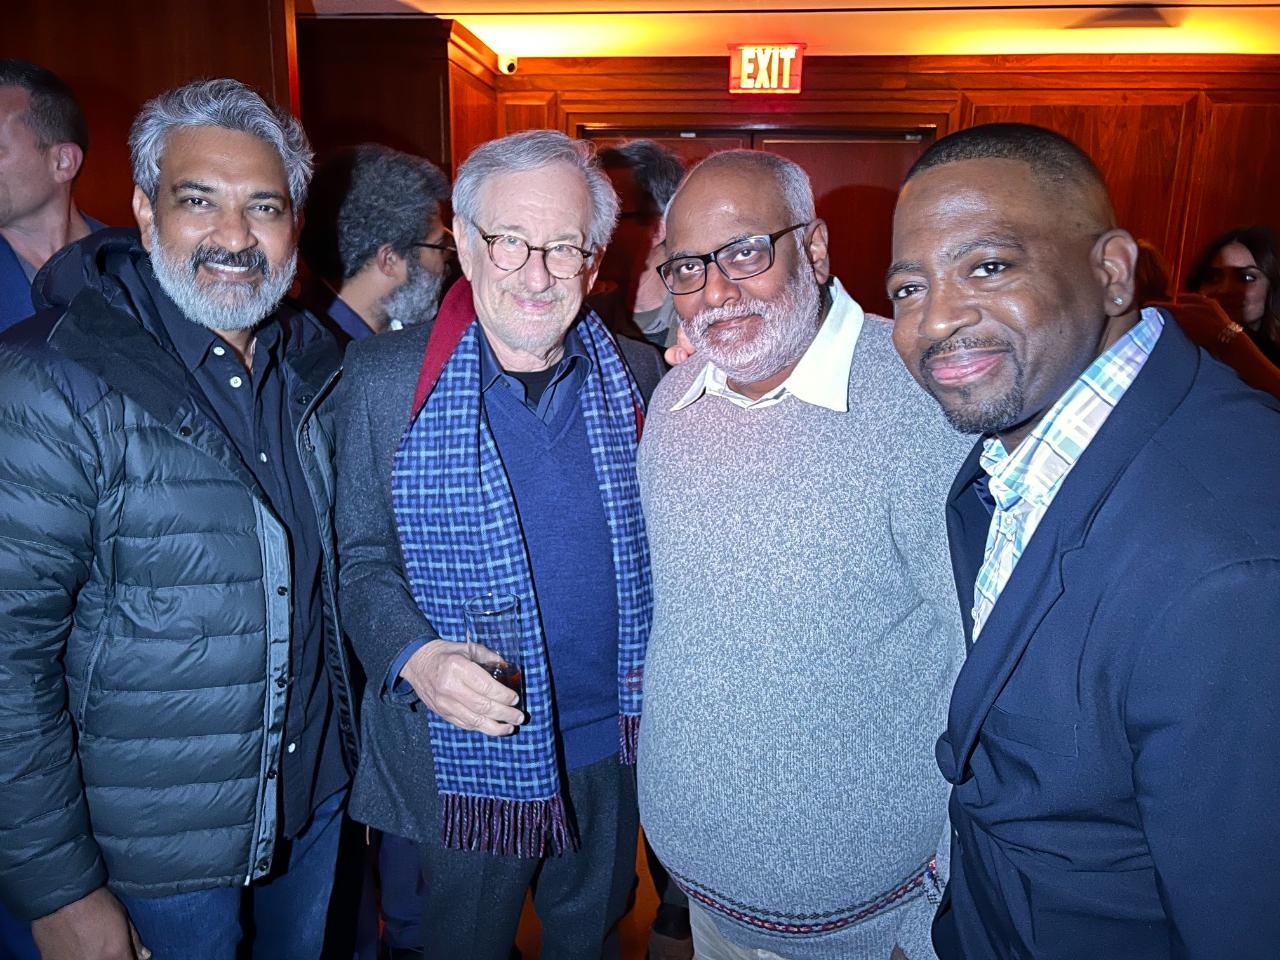 Rajamouli shared a string of pictures on Instagram from his meeting with Spielberg along with Golden Globe-winning 'RRR' music composer M.M. Keeravani.The first shows Rajamouli all excited with both hands on his face on meeting the maestro. The second picture has Keeravani and Rajamouli posing with Speilberg. 